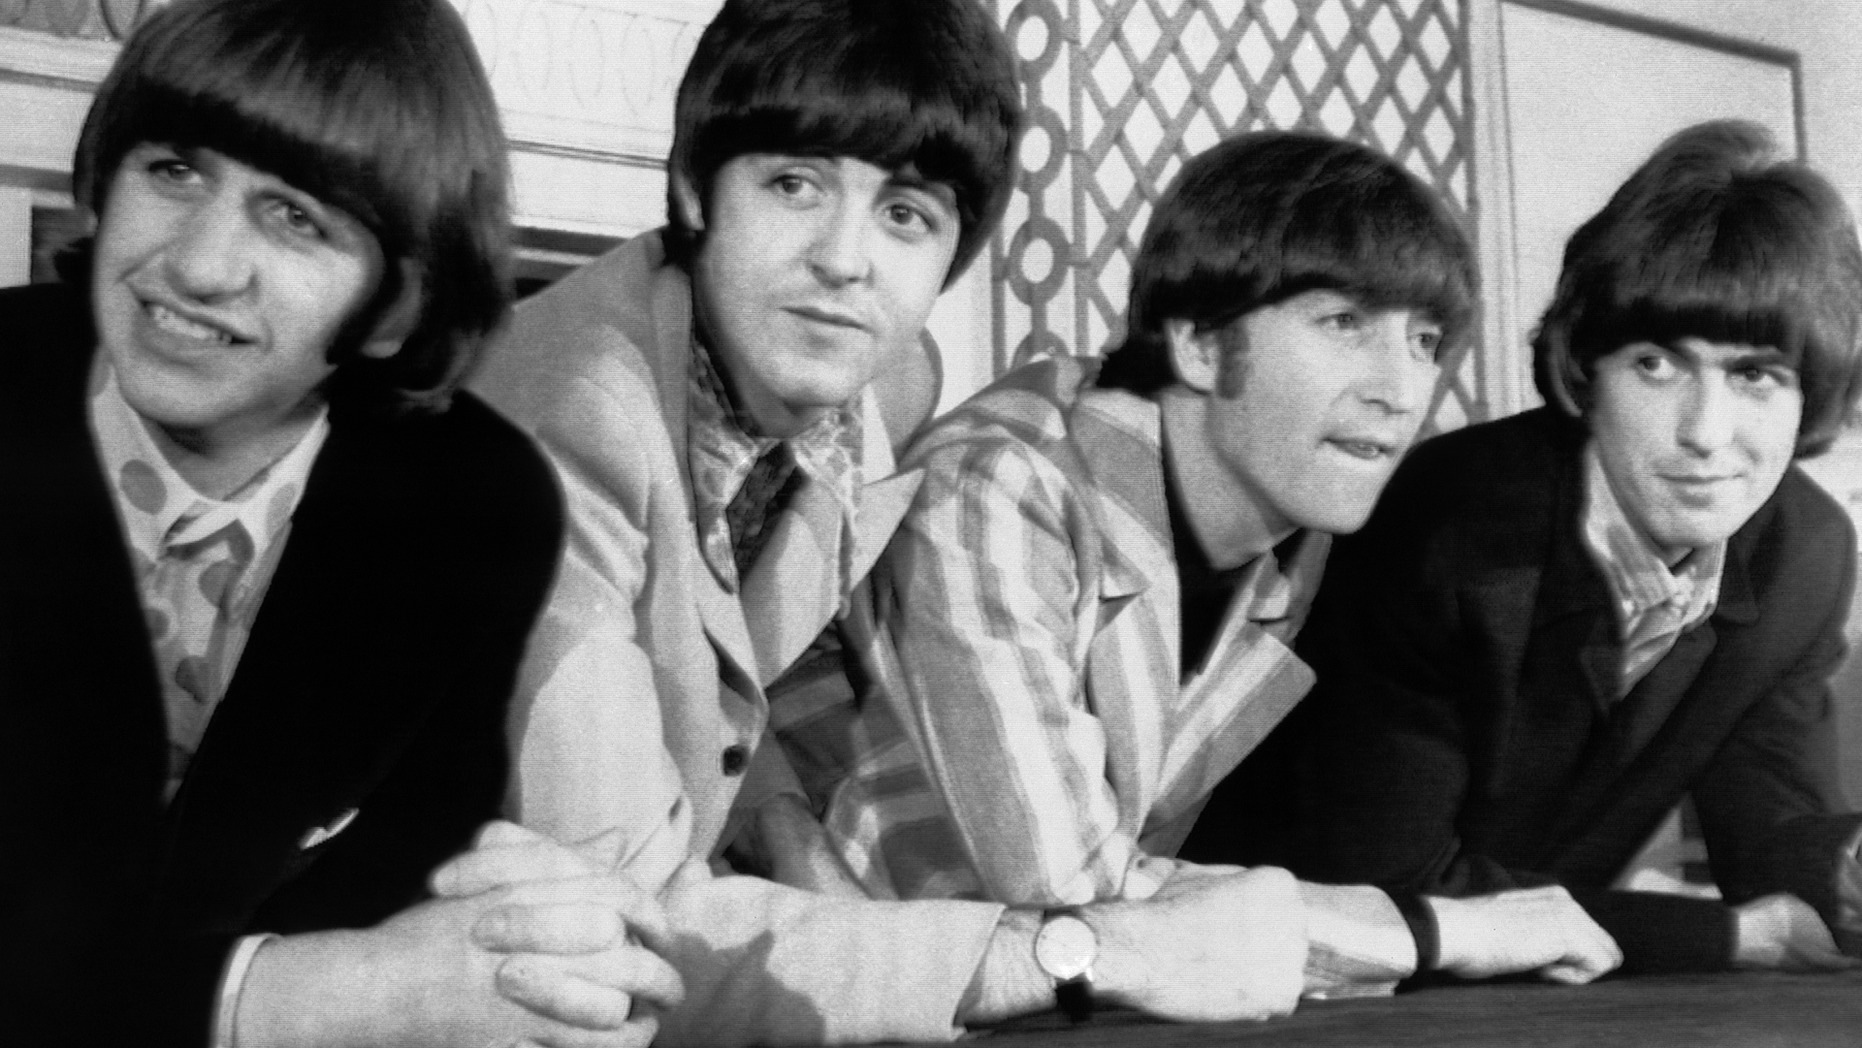 The Beatles remain at the top of the list of rock bands of all time.